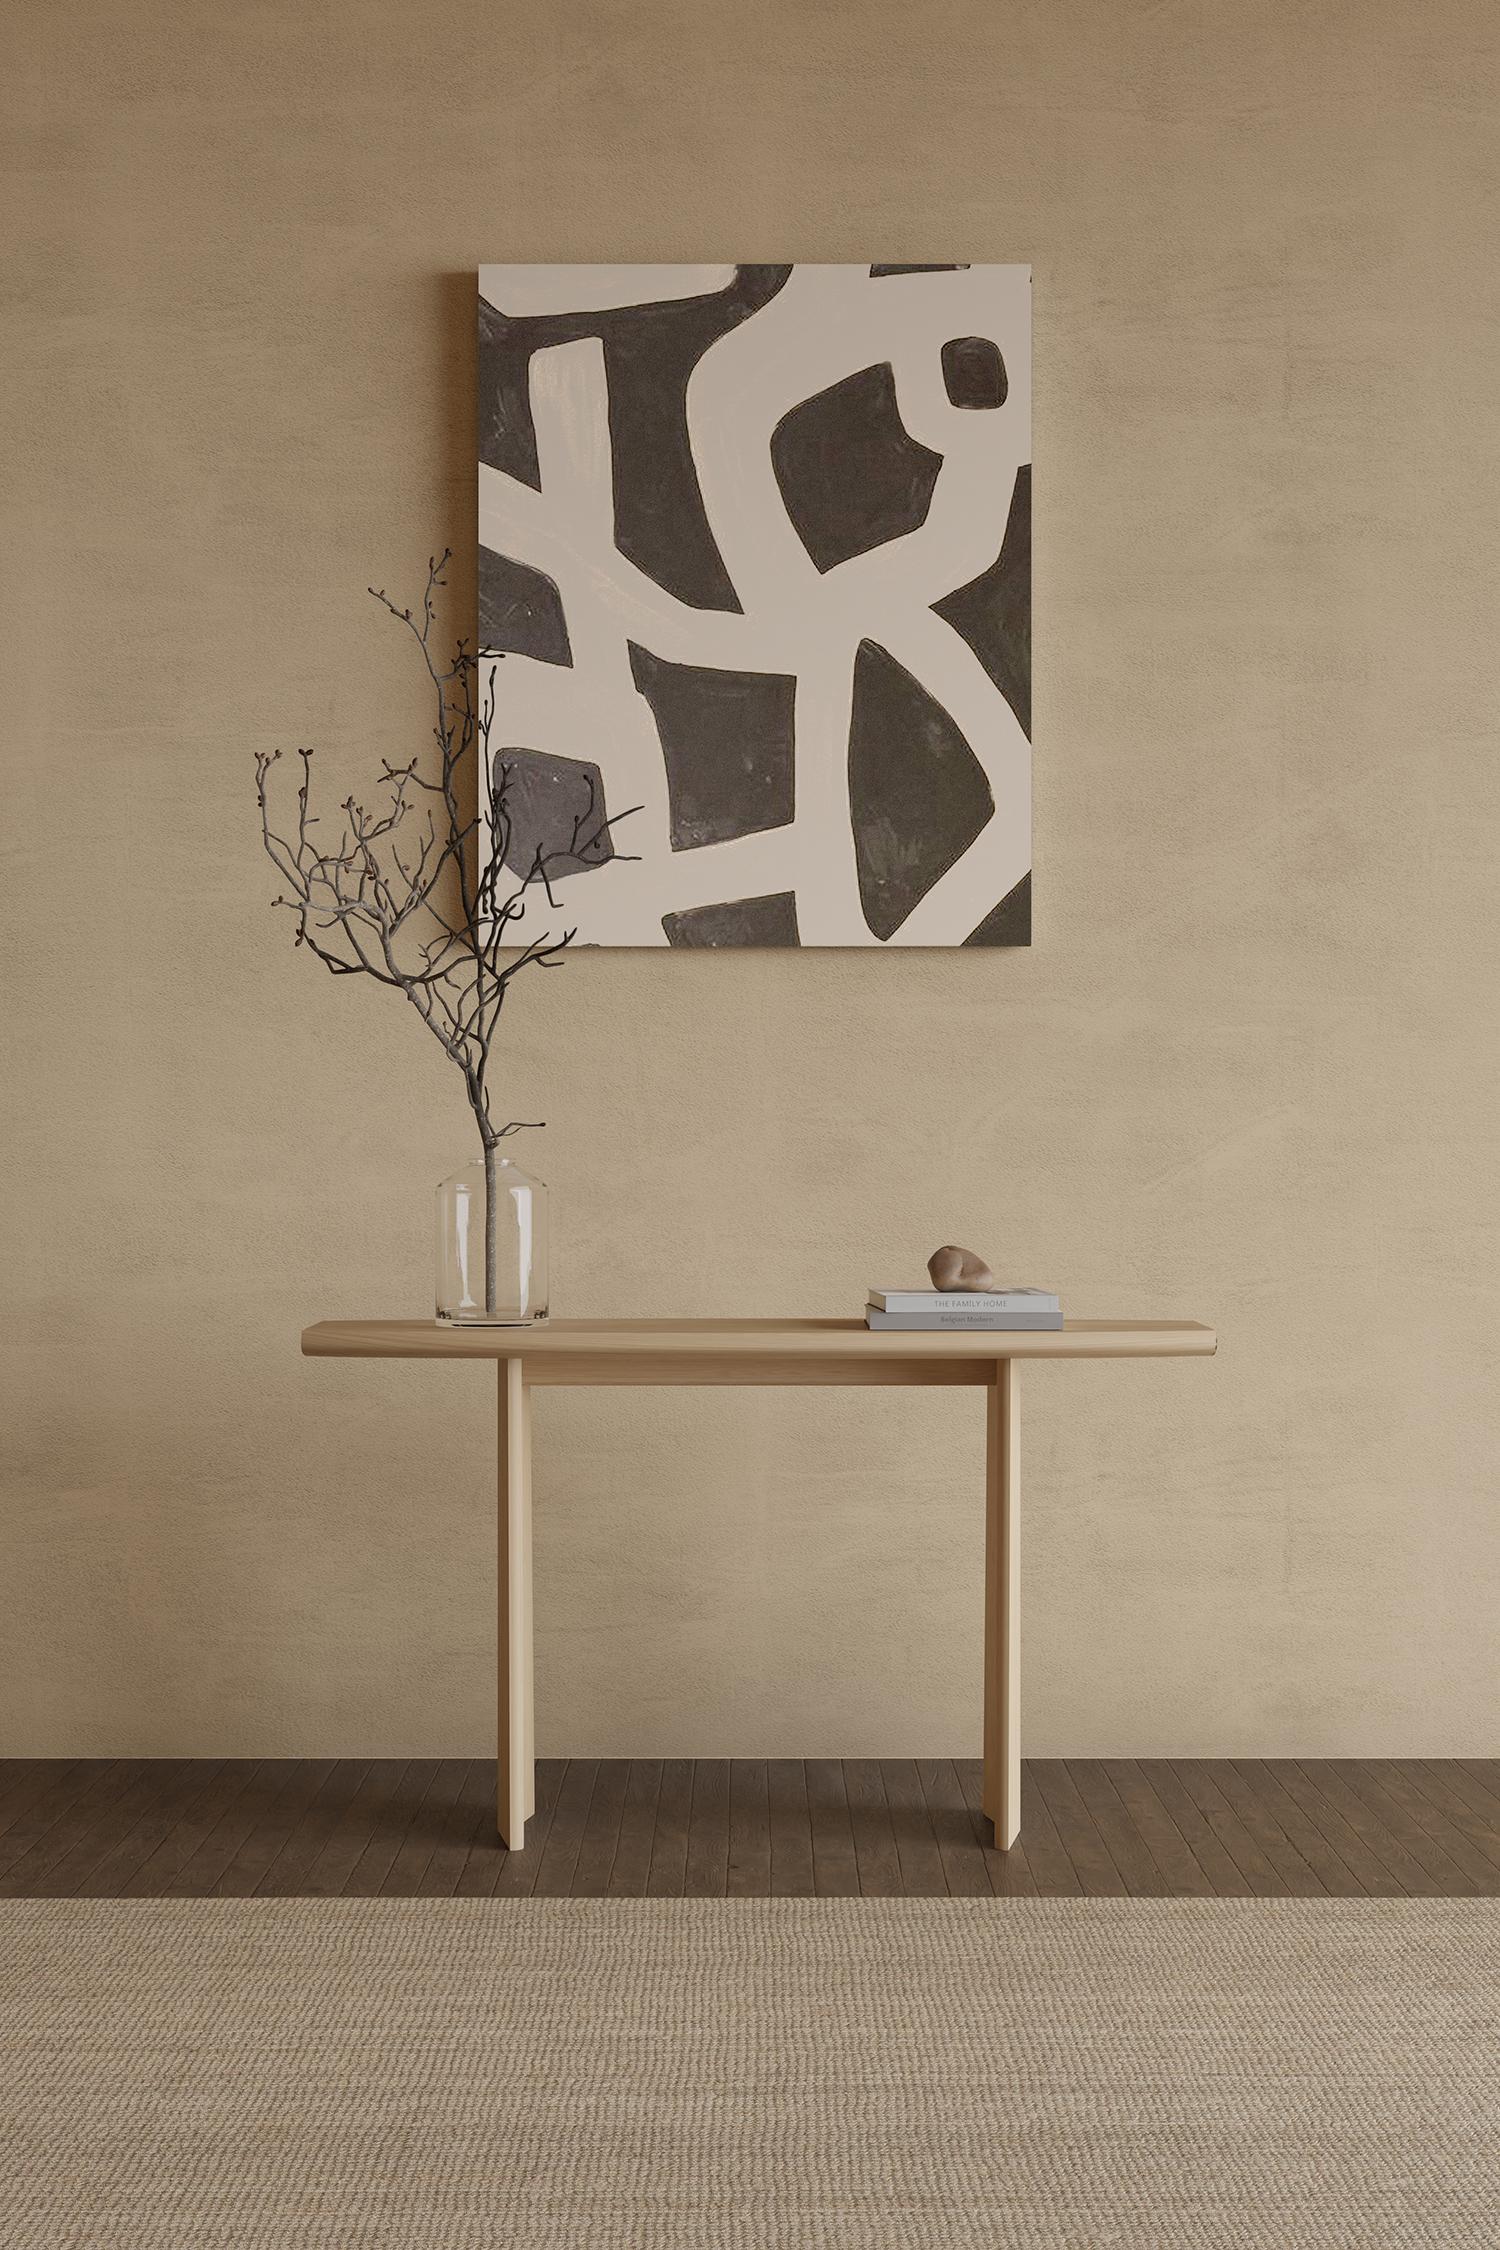 Peana Sideboard in Natural Oak Wood Finish, Console Table by Joel Escalona

Peana, which in English translates to base or pedestal, is a series of tables and different surfaces inspired by the idea of creating worthy furniture pieces to place and